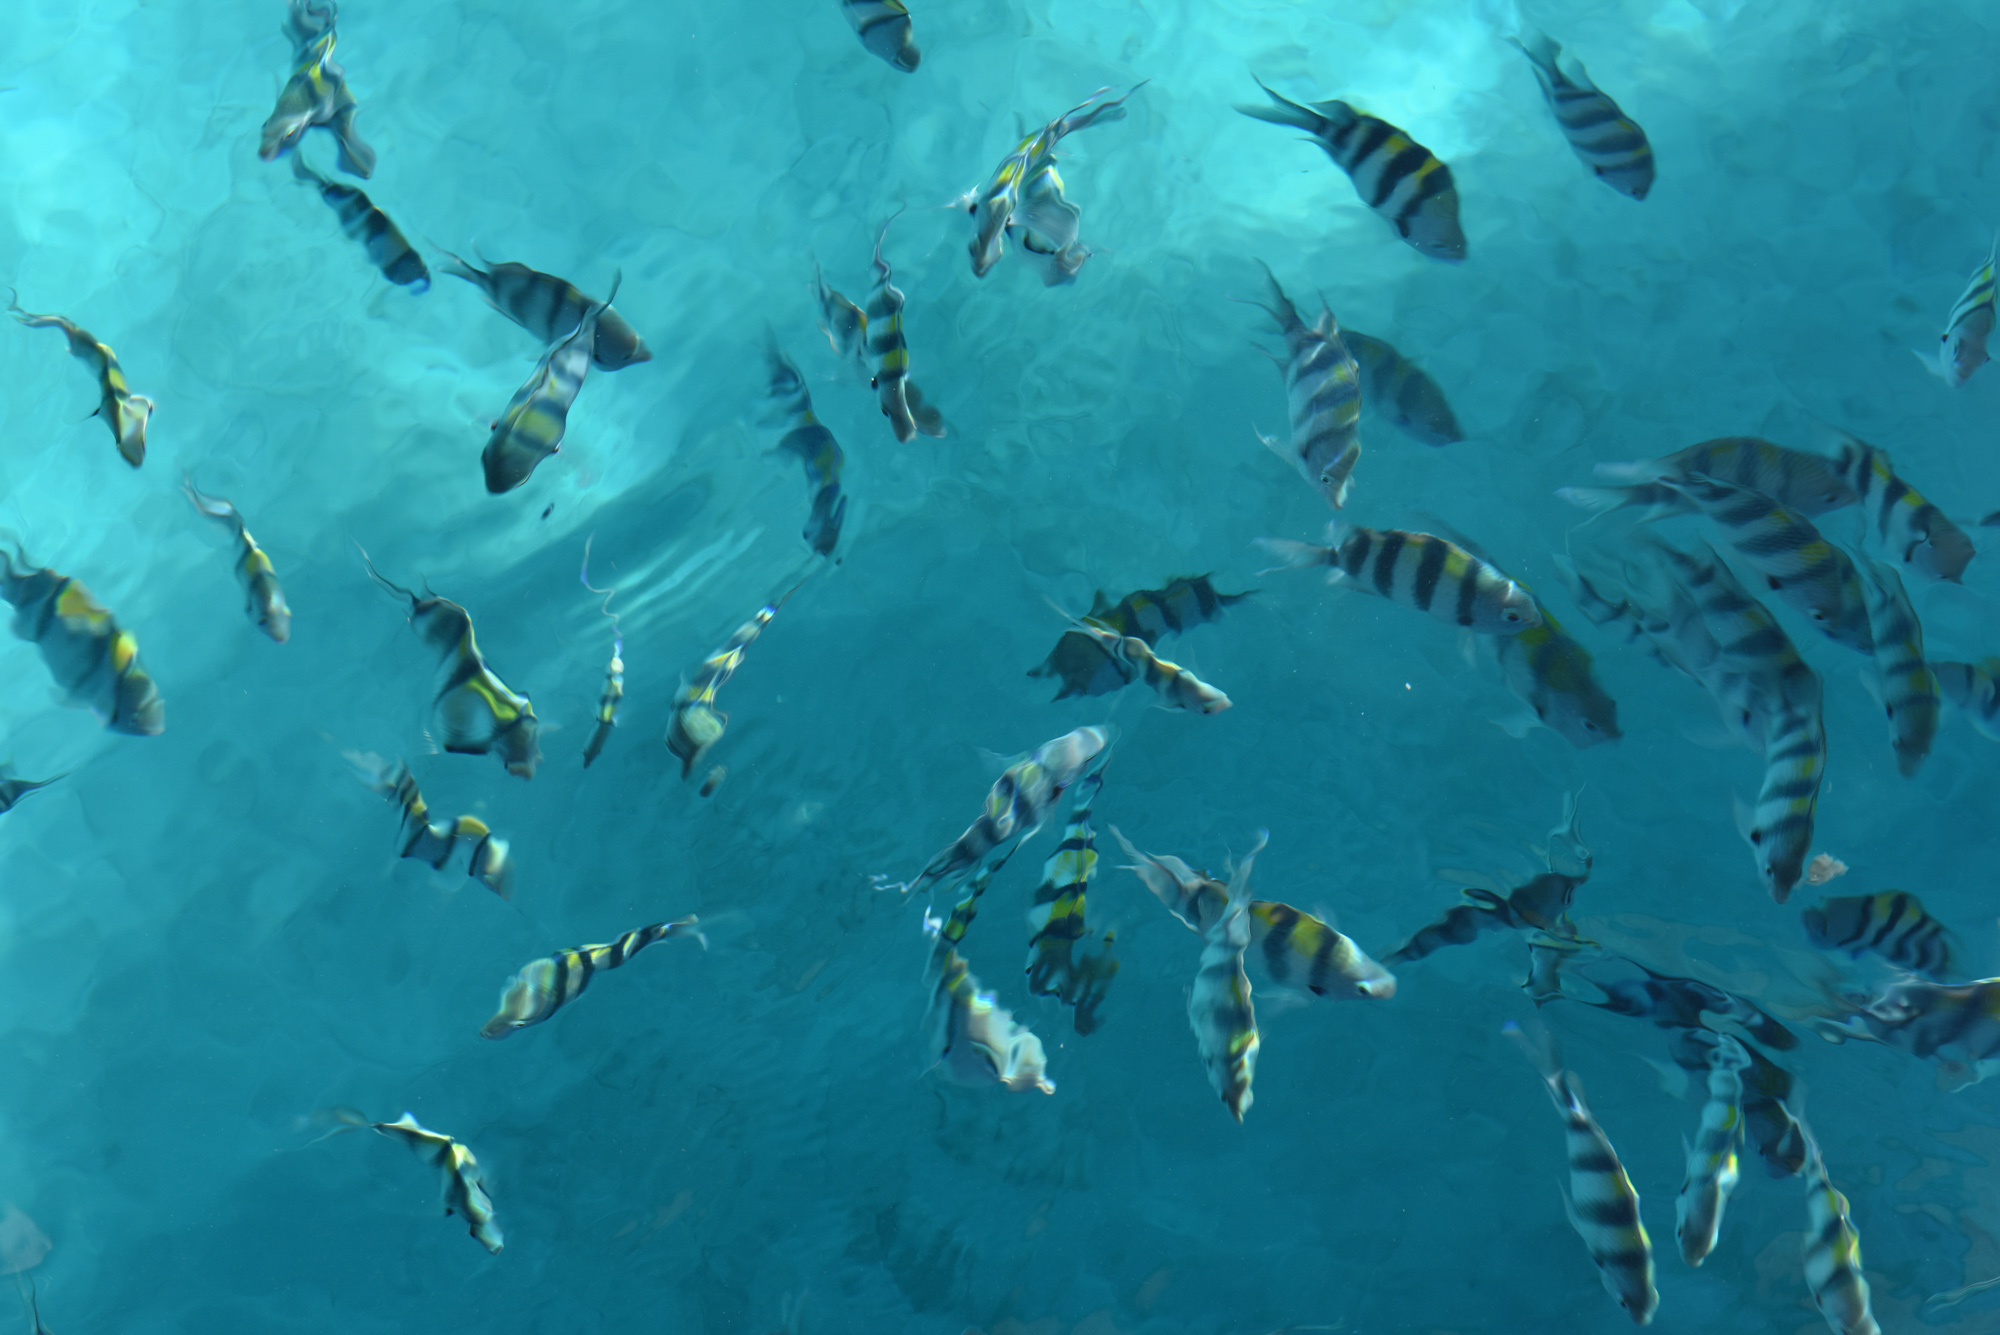 Picture of fishes in the blue turquoise sea